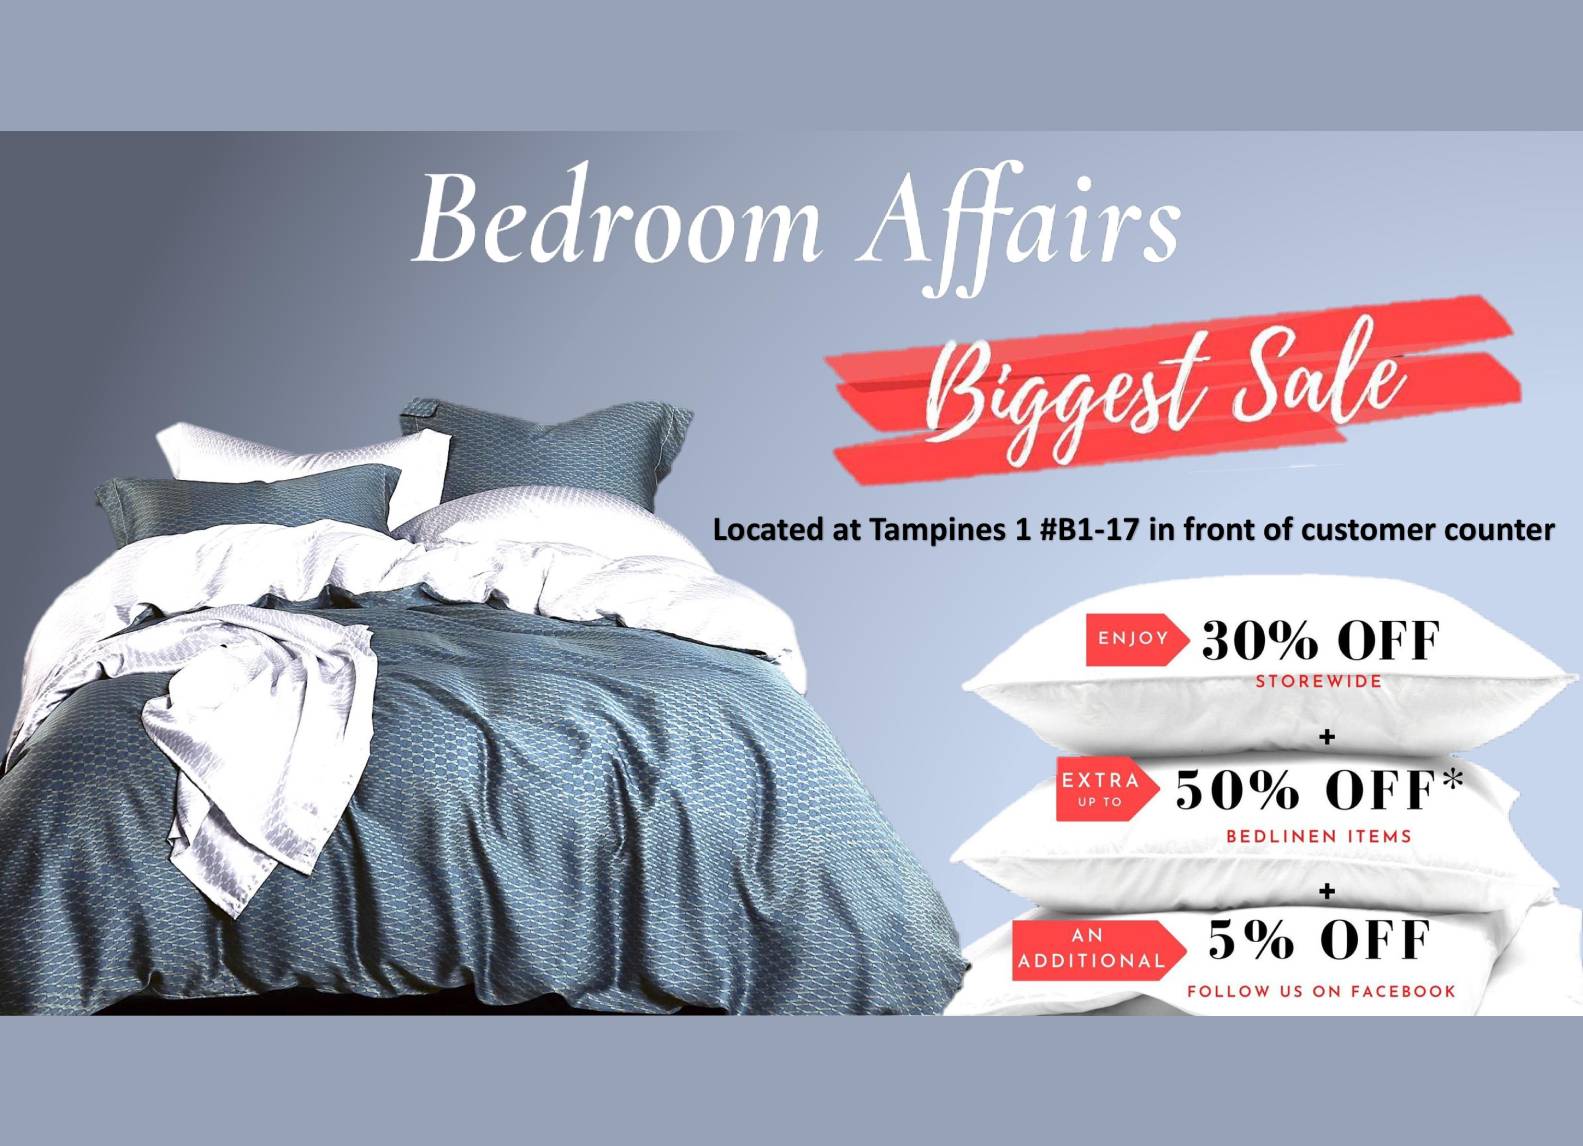 Bedroom Affairs Storewide Promotion